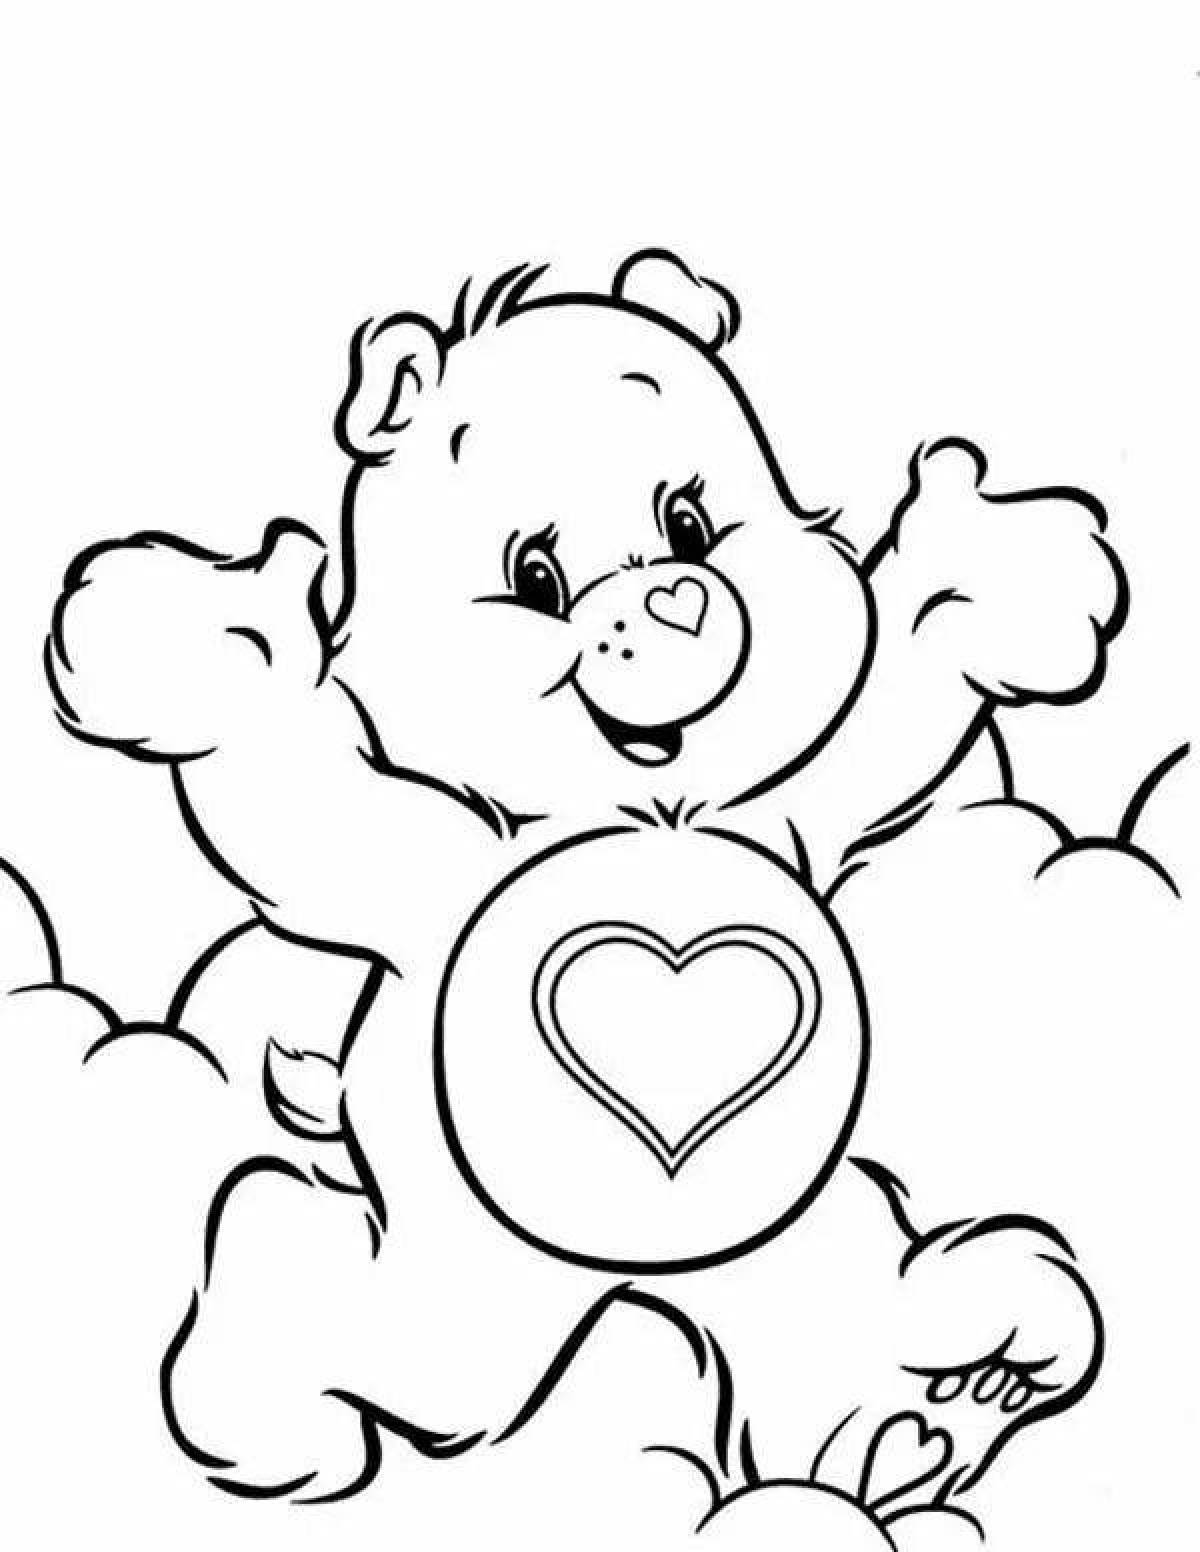 Hugging teddy bear with heart coloring page